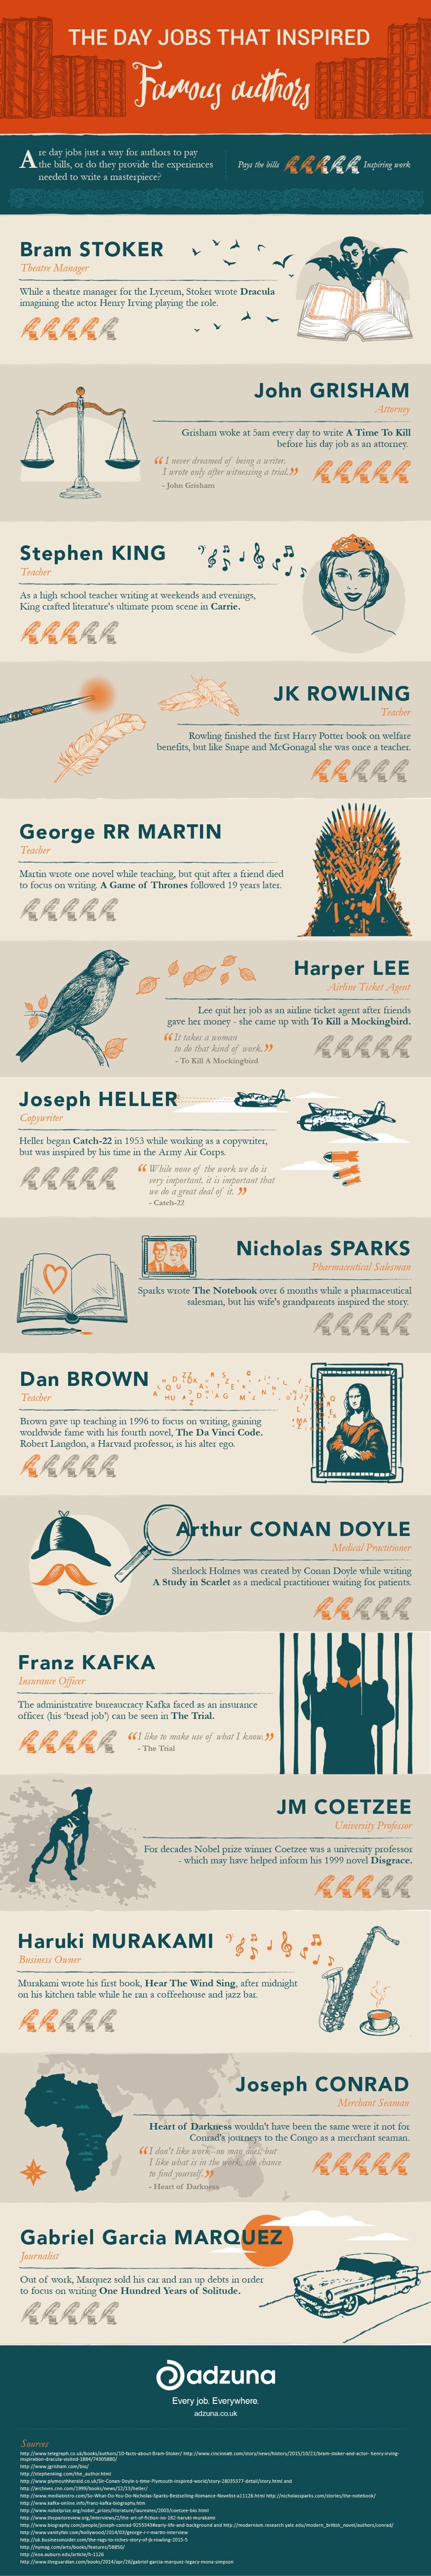 Day jobs that inspired famous authors #infographic